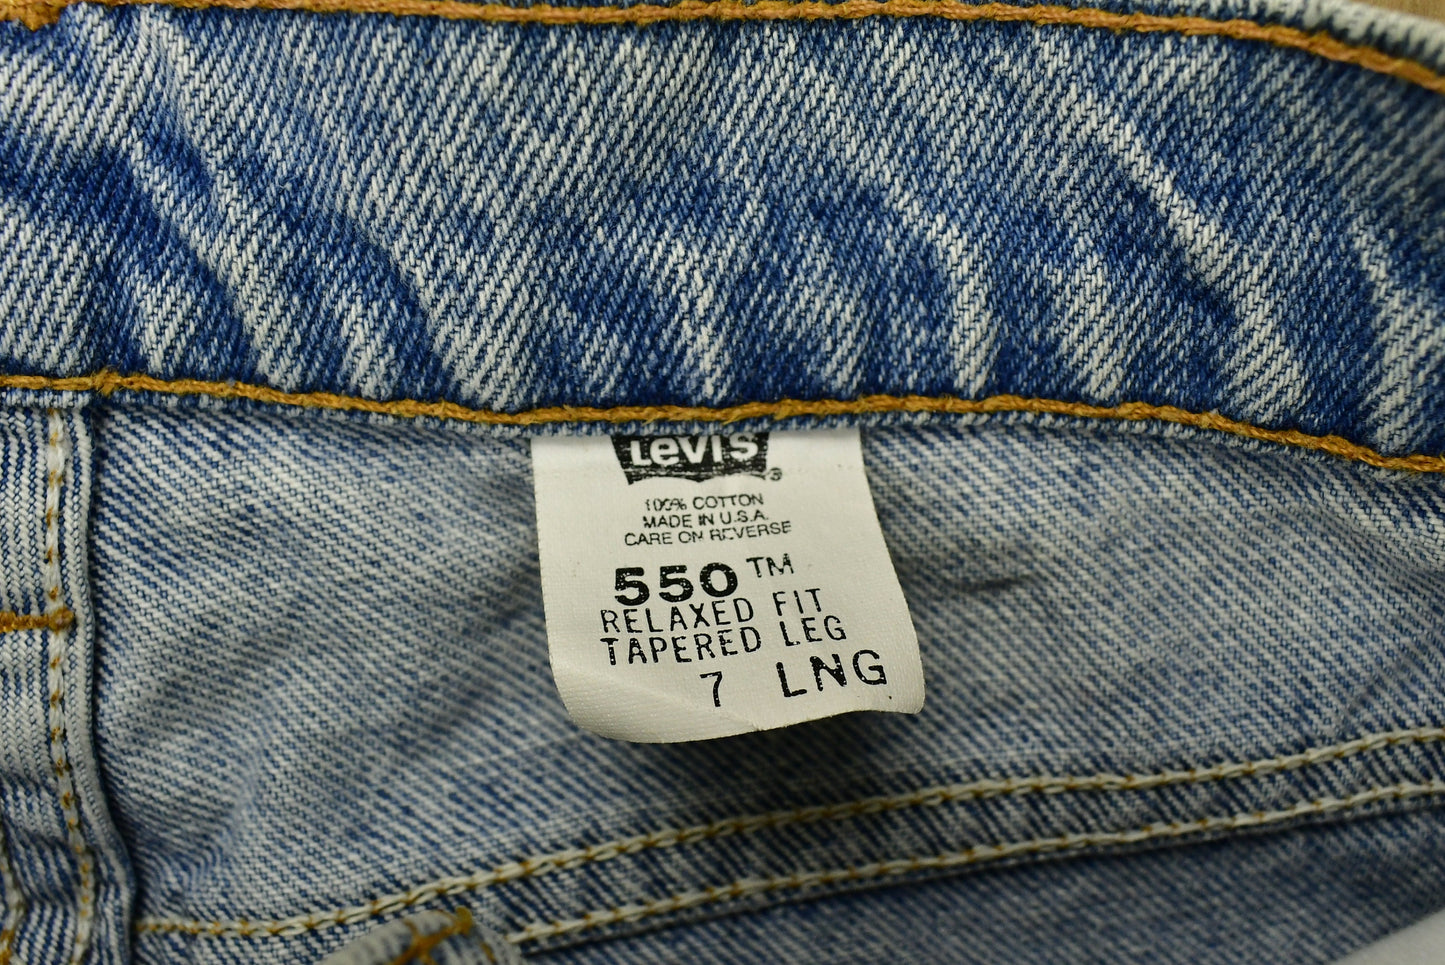 Vintage 1990s Levi's 550 Red Tab Jeans Size 7 / 90s Denim / Relaxed Fit / Vintage Denim / Tapered Leg / Made In USA / Vintage Levi's